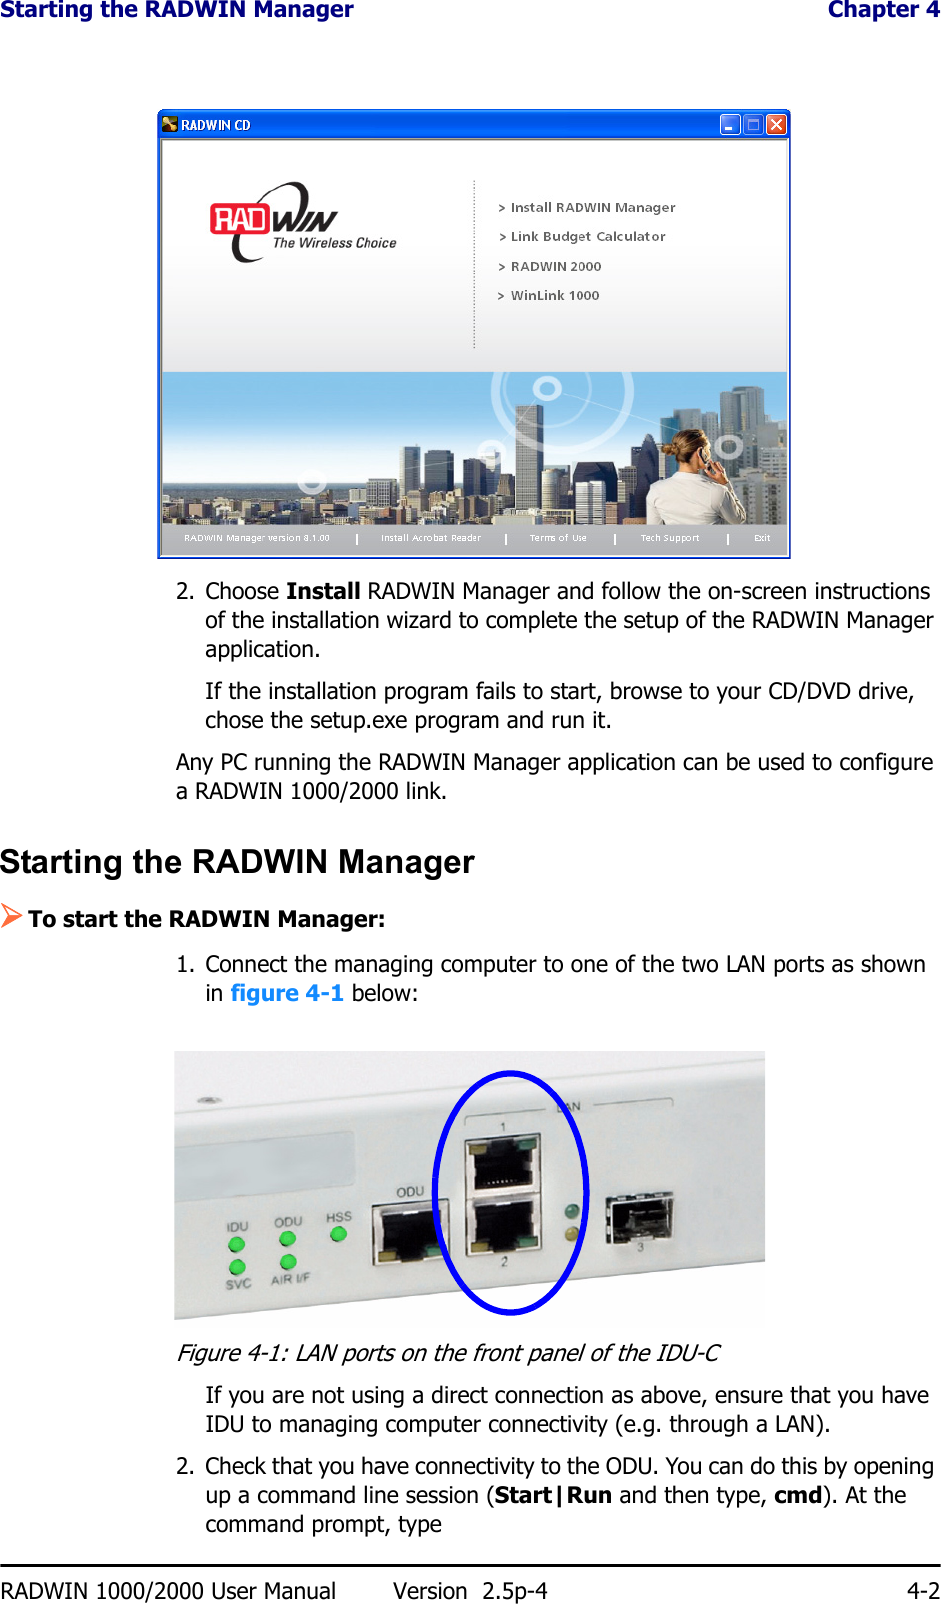 Starting the RADWIN Manager  Chapter 4RADWIN 1000/2000 User Manual Version  2.5p-4 4-22. Choose Install RADWIN Manager and follow the on-screen instructions of the installation wizard to complete the setup of the RADWIN Manager application.If the installation program fails to start, browse to your CD/DVD drive, chose the setup.exe program and run it.Any PC running the RADWIN Manager application can be used to configure a RADWIN 1000/2000 link.Starting the RADWIN Manager ¾To start the RADWIN Manager:1. Connect the managing computer to one of the two LAN ports as shown in figure 4-1 below:Figure 4-1: LAN ports on the front panel of the IDU-CIf you are not using a direct connection as above, ensure that you have IDU to managing computer connectivity (e.g. through a LAN).2. Check that you have connectivity to the ODU. You can do this by opening up a command line session (Start|Run and then type, cmd). At the command prompt, type